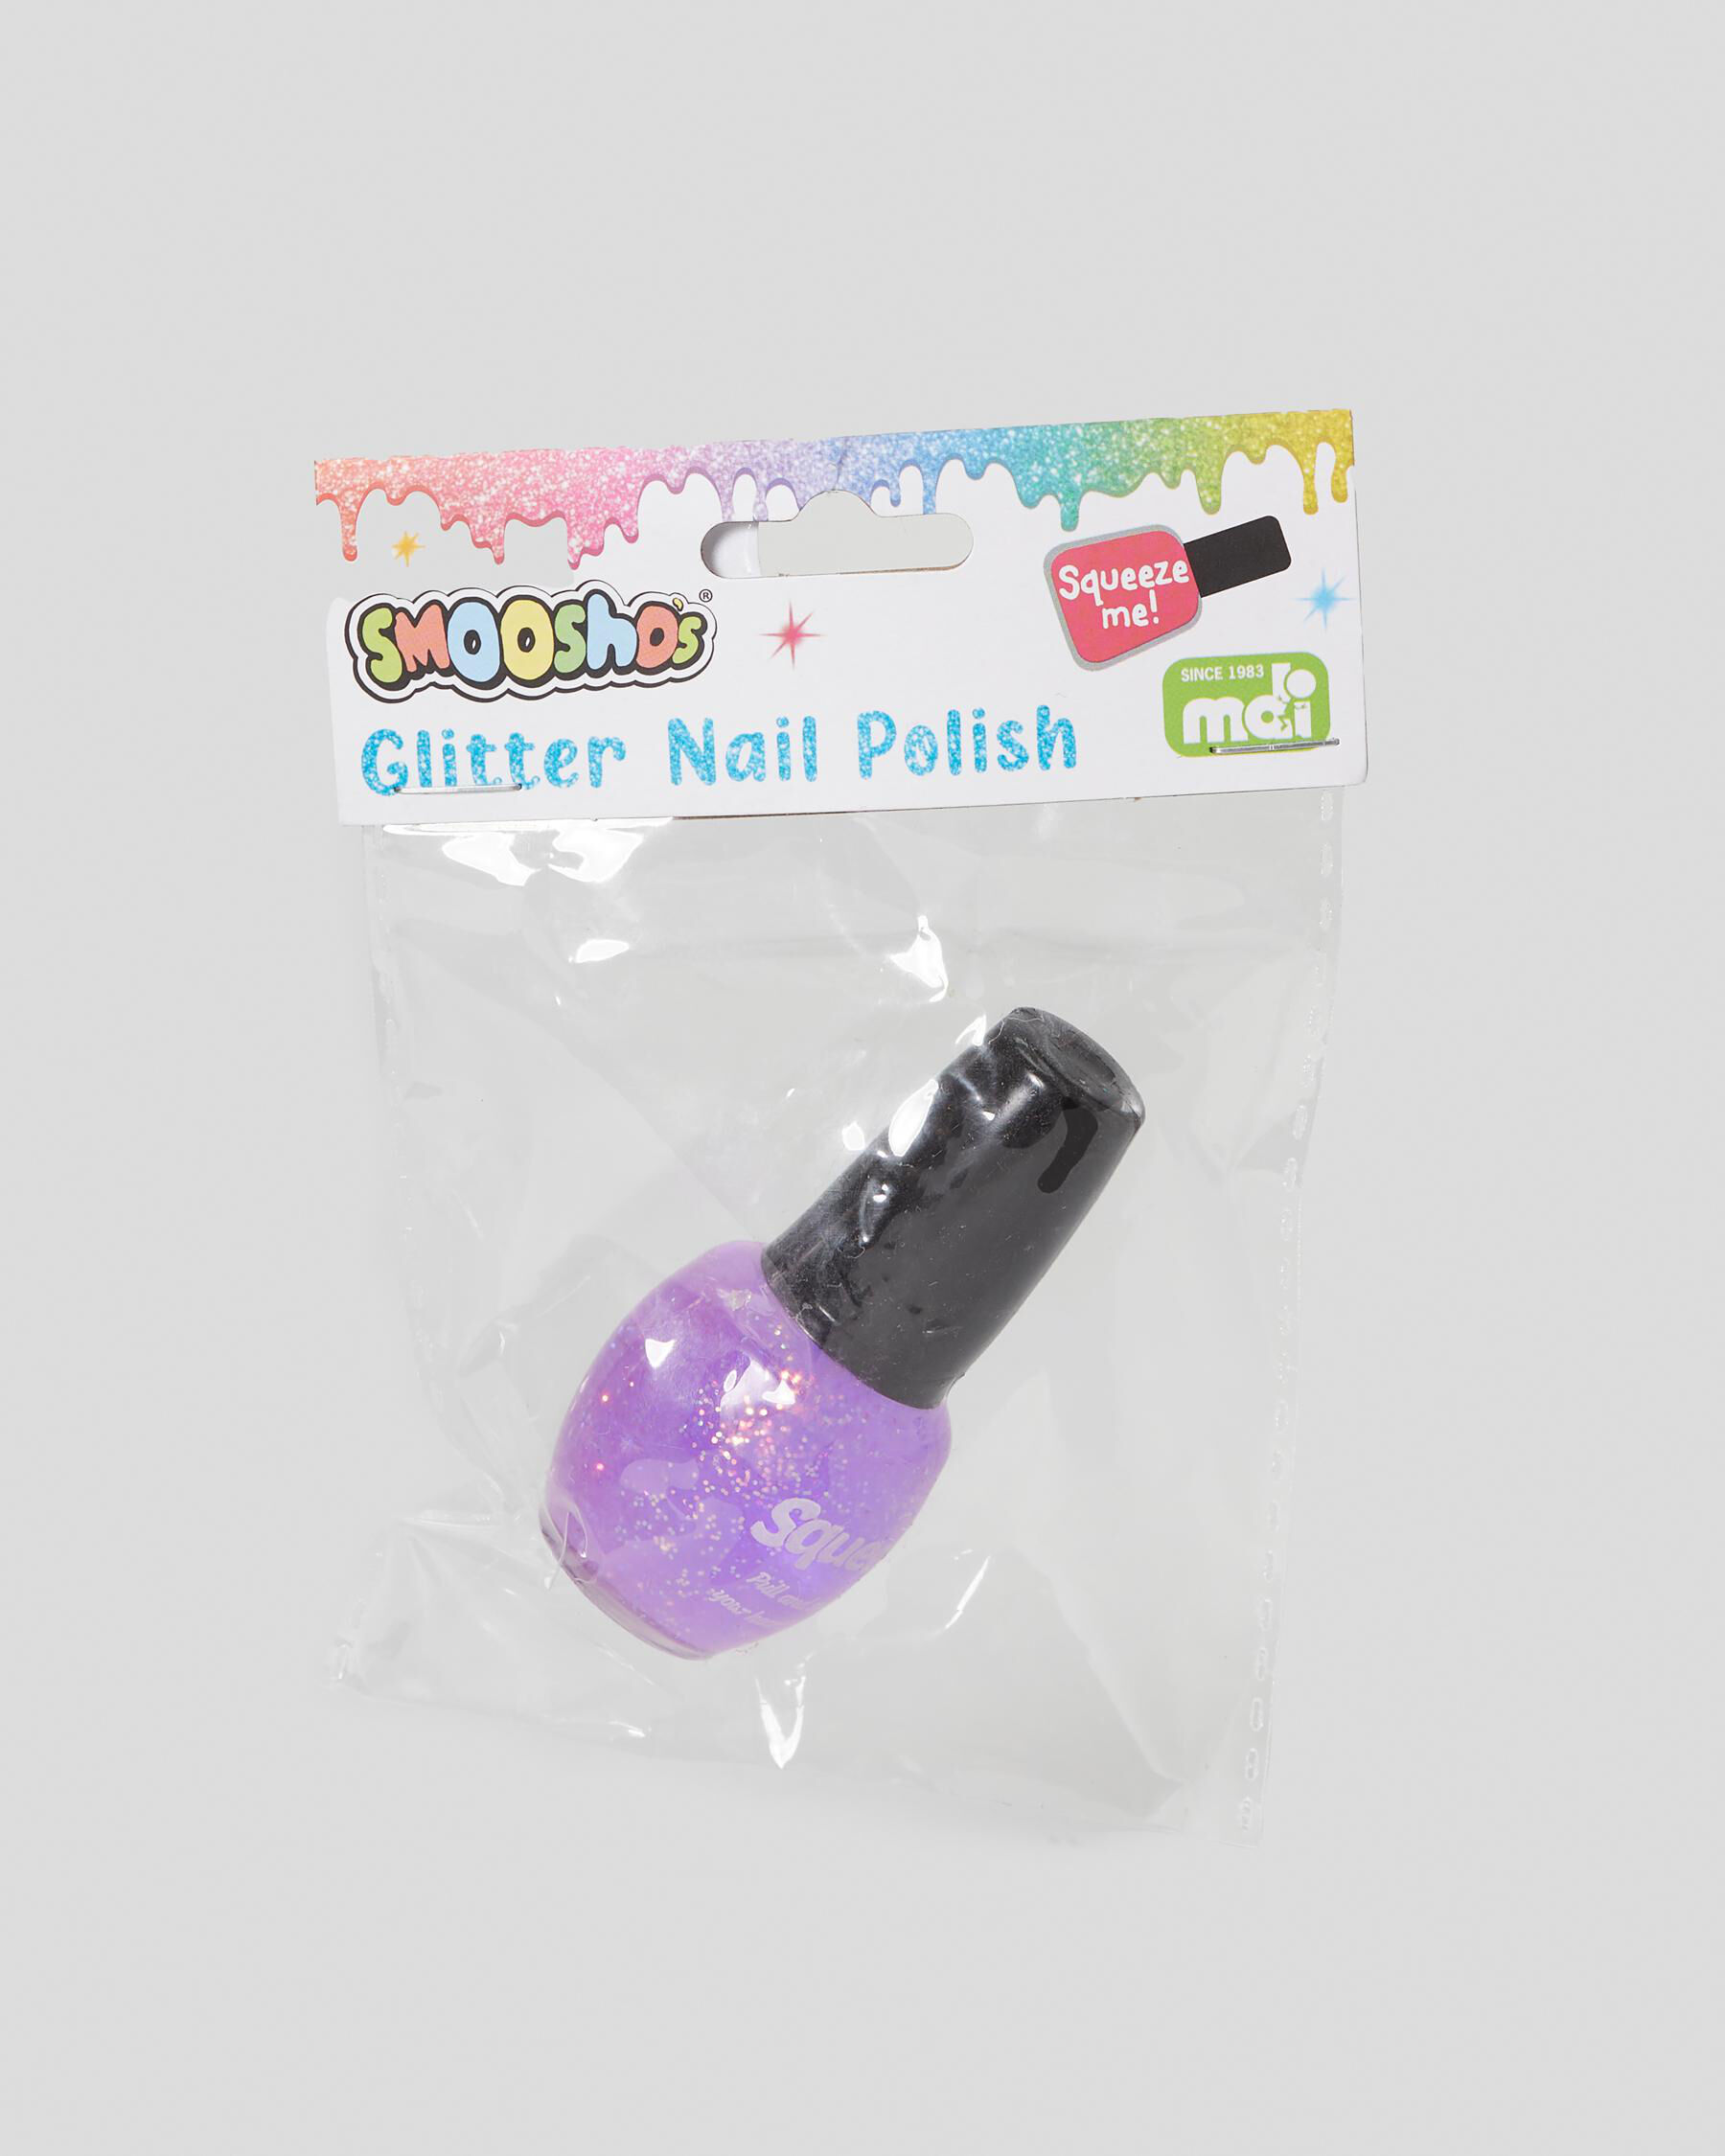 Glitter Nail Polish Squeeze Toy